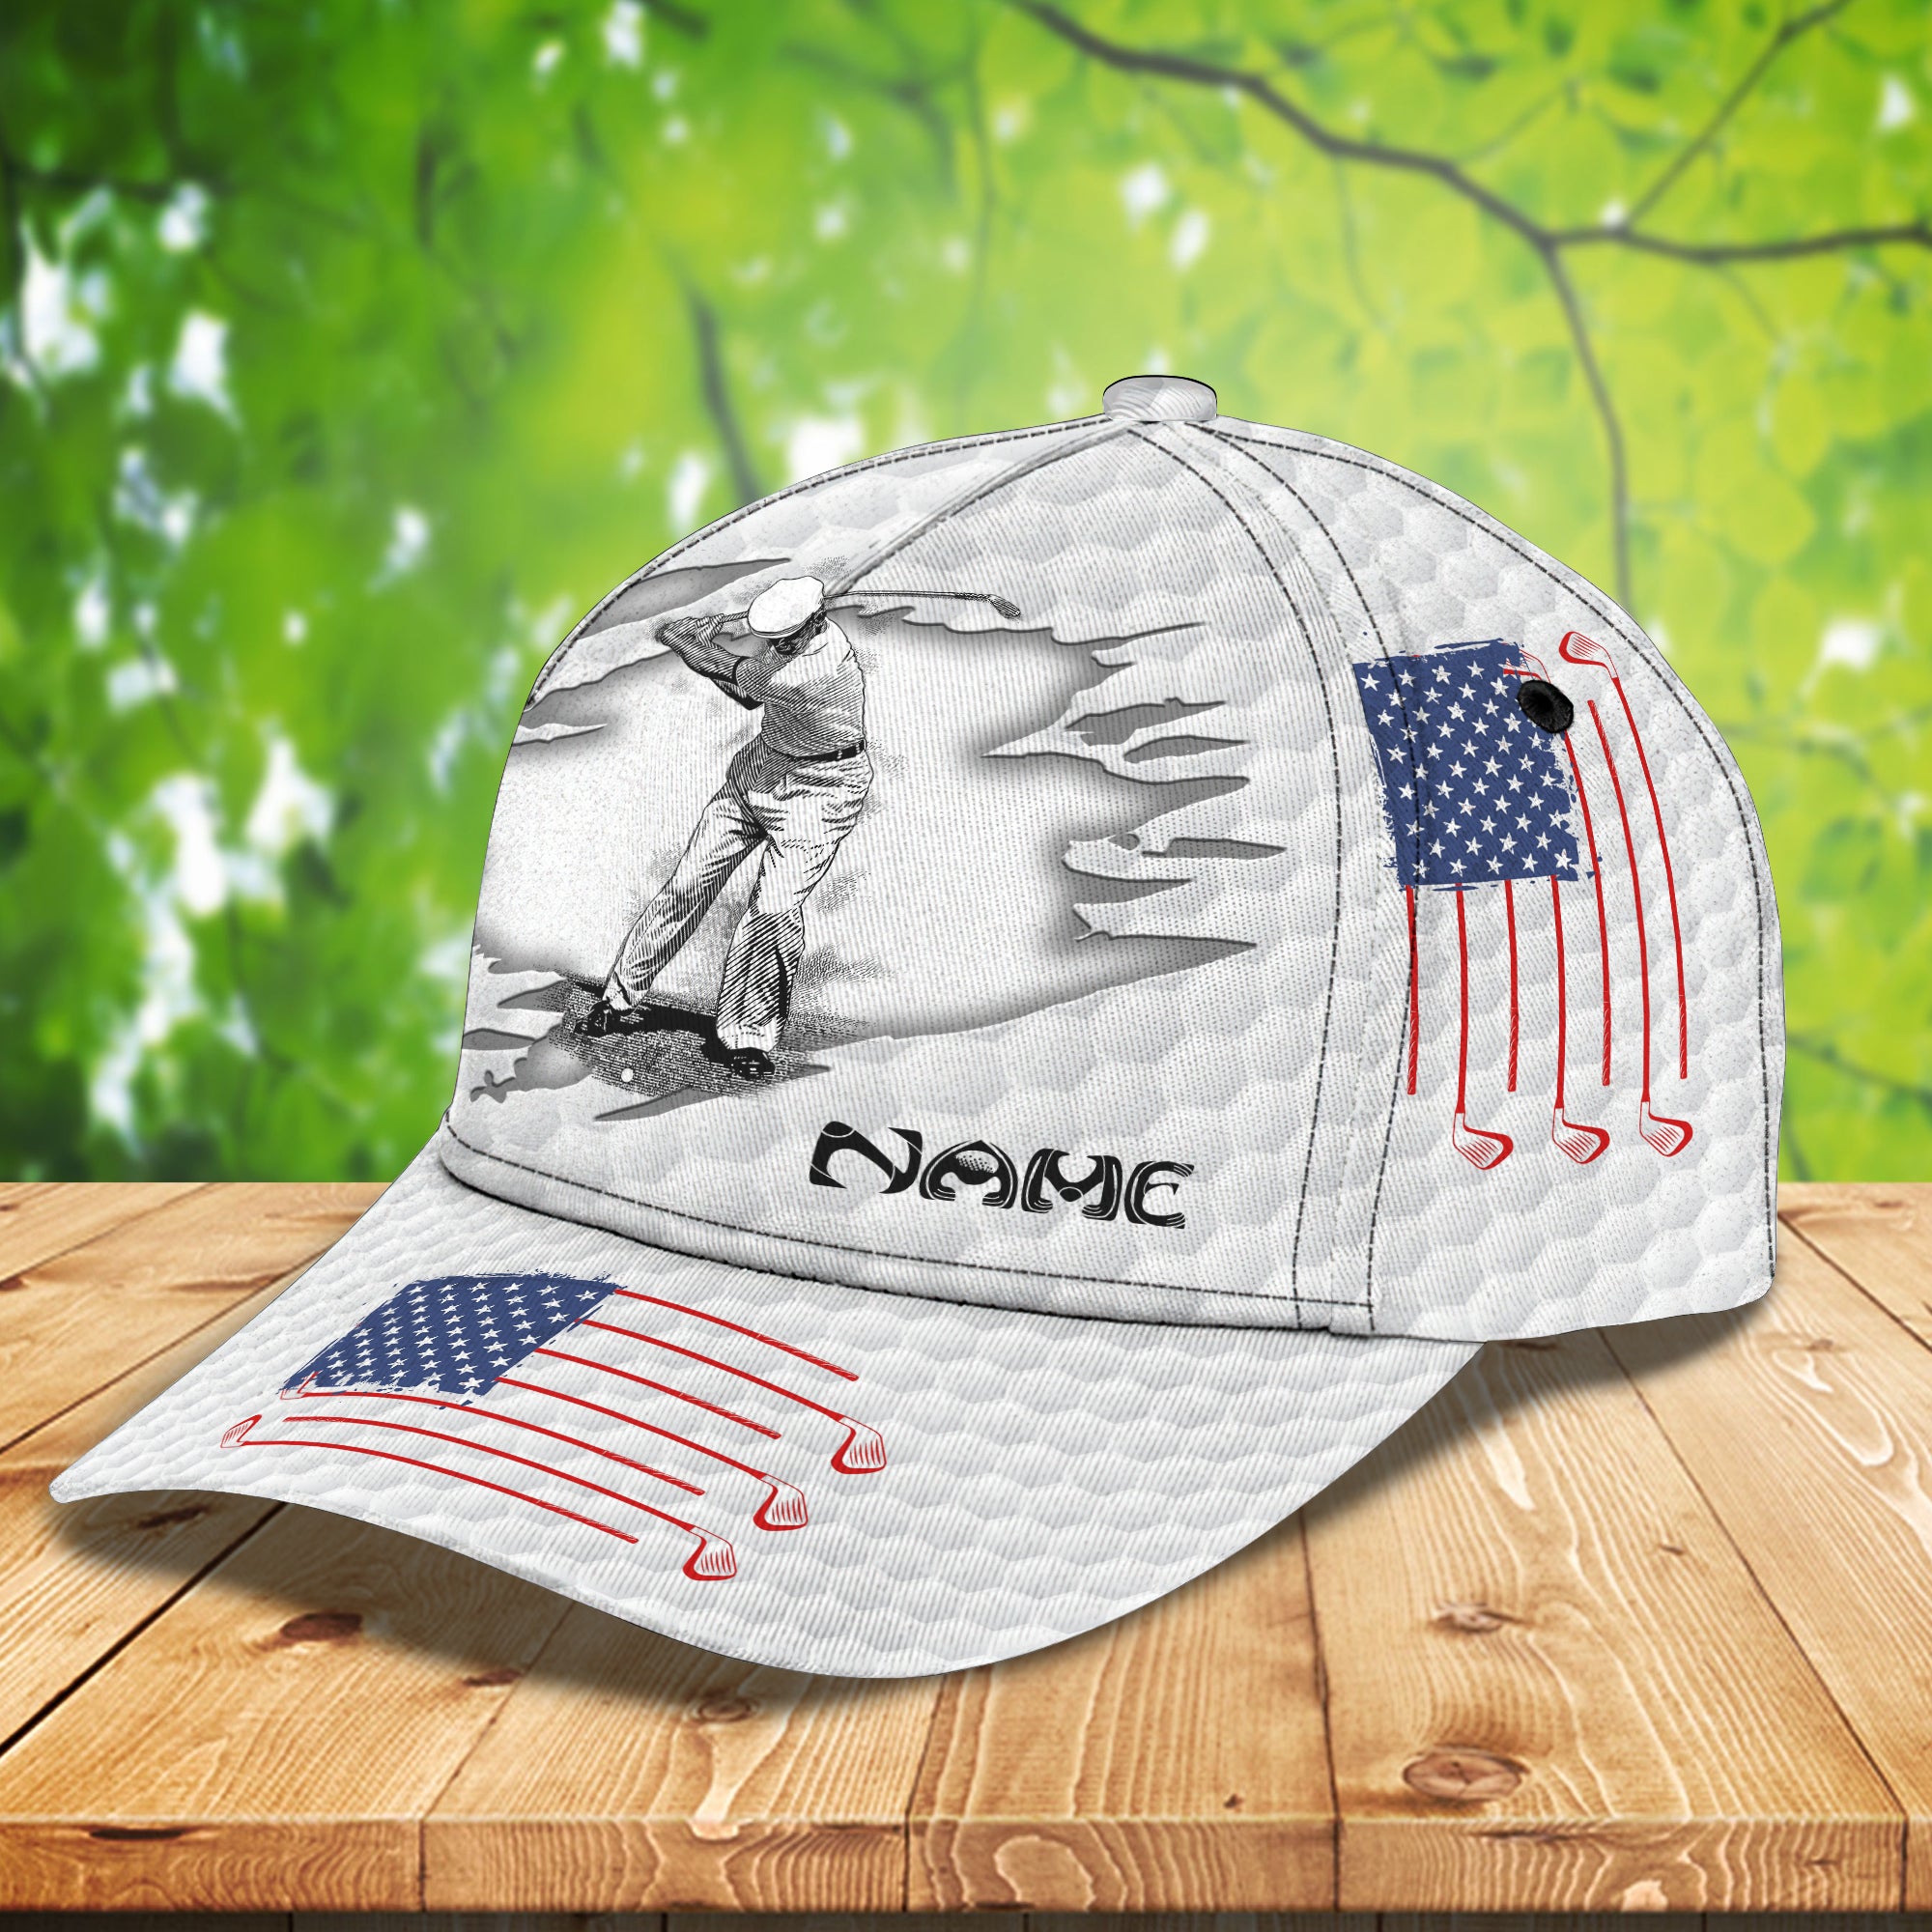 Golf - Personalized Name Cap - DAT93-015